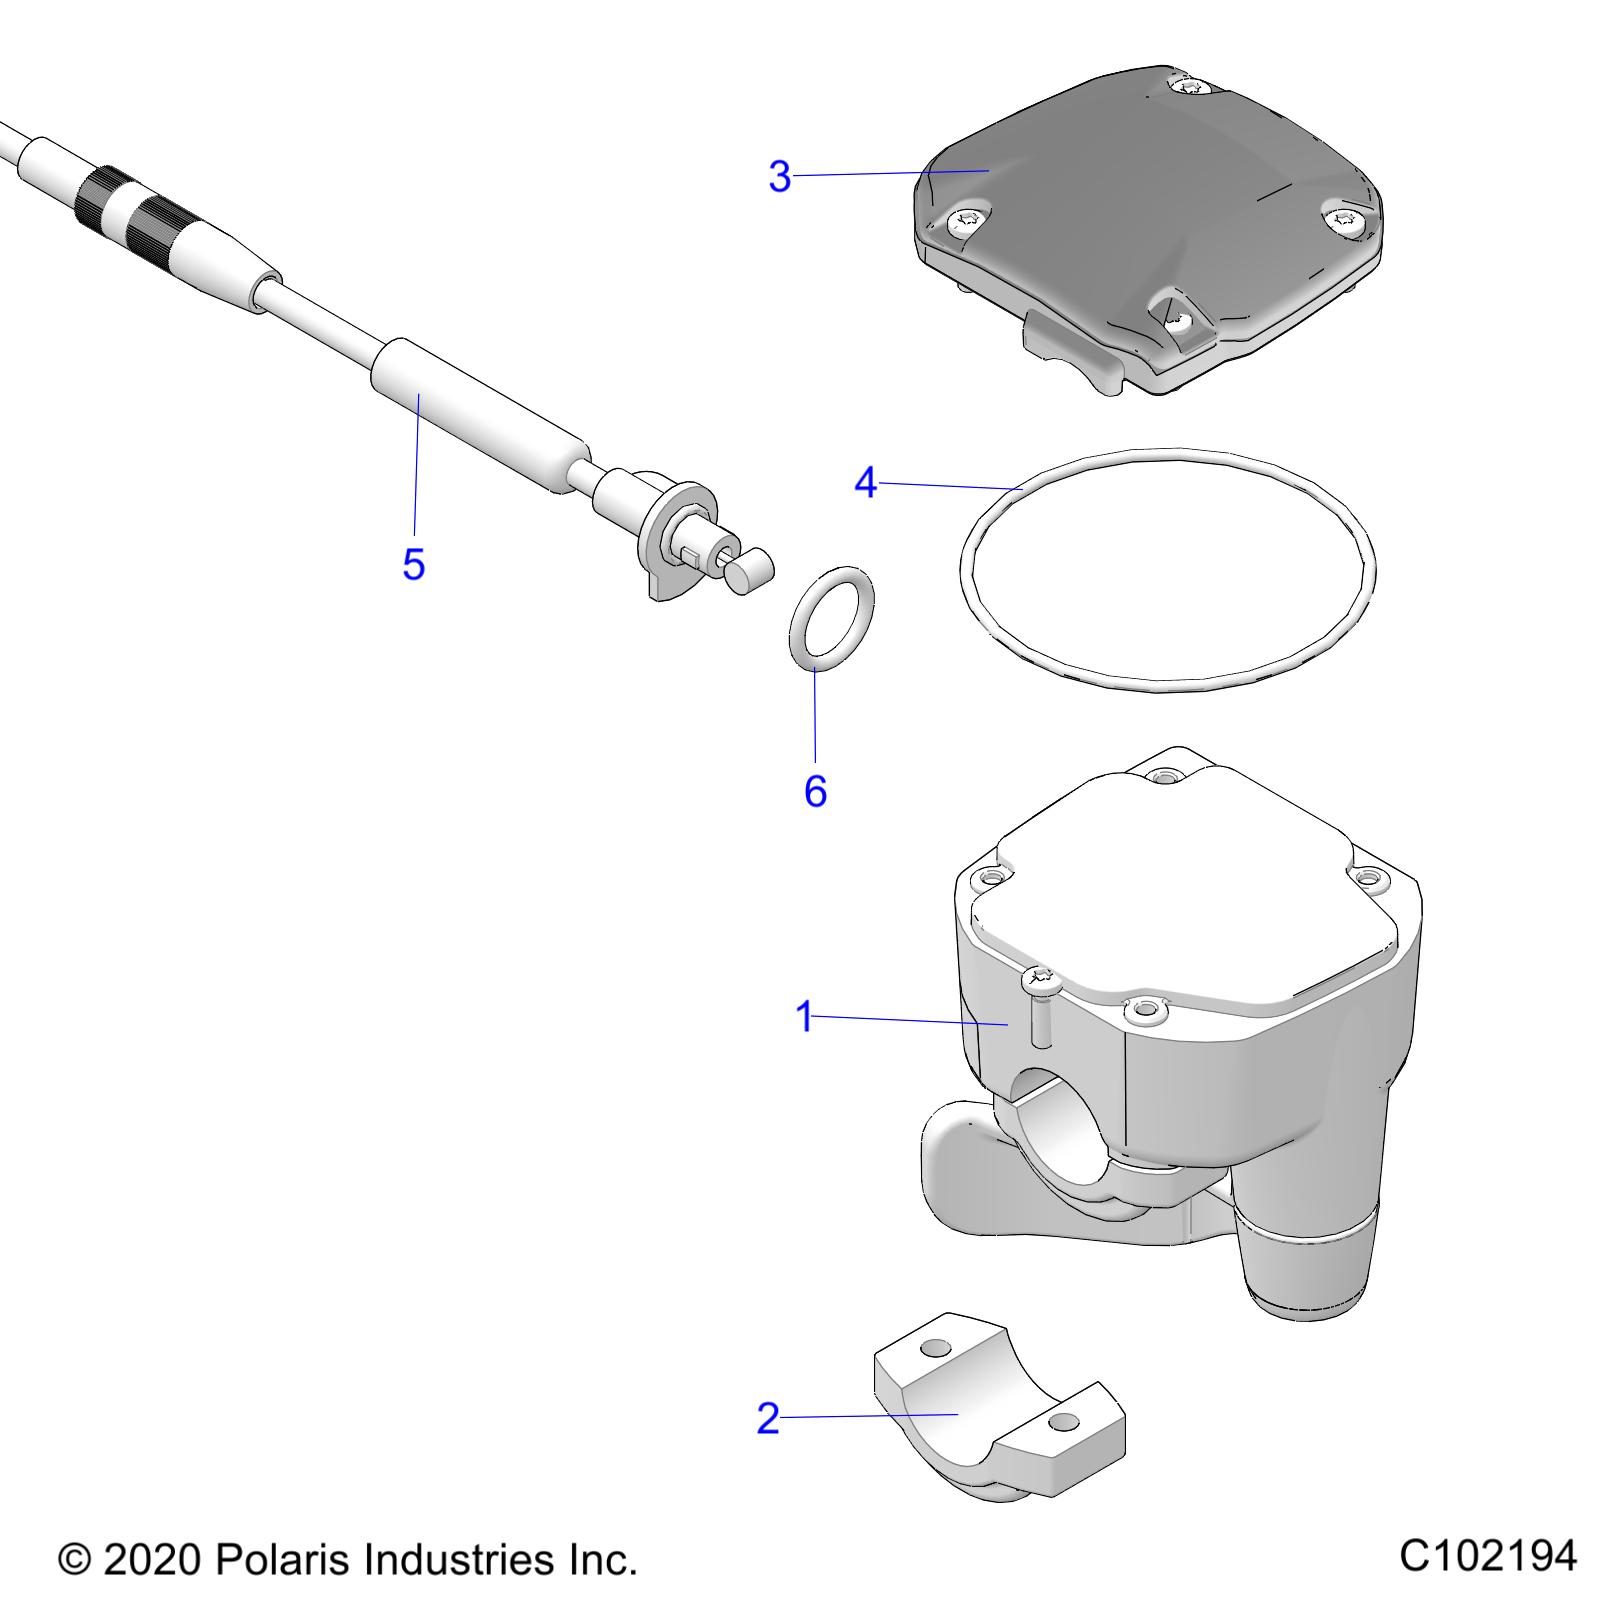 Part Number : 2010403 THUMB THROTTLE ASSEMBLY